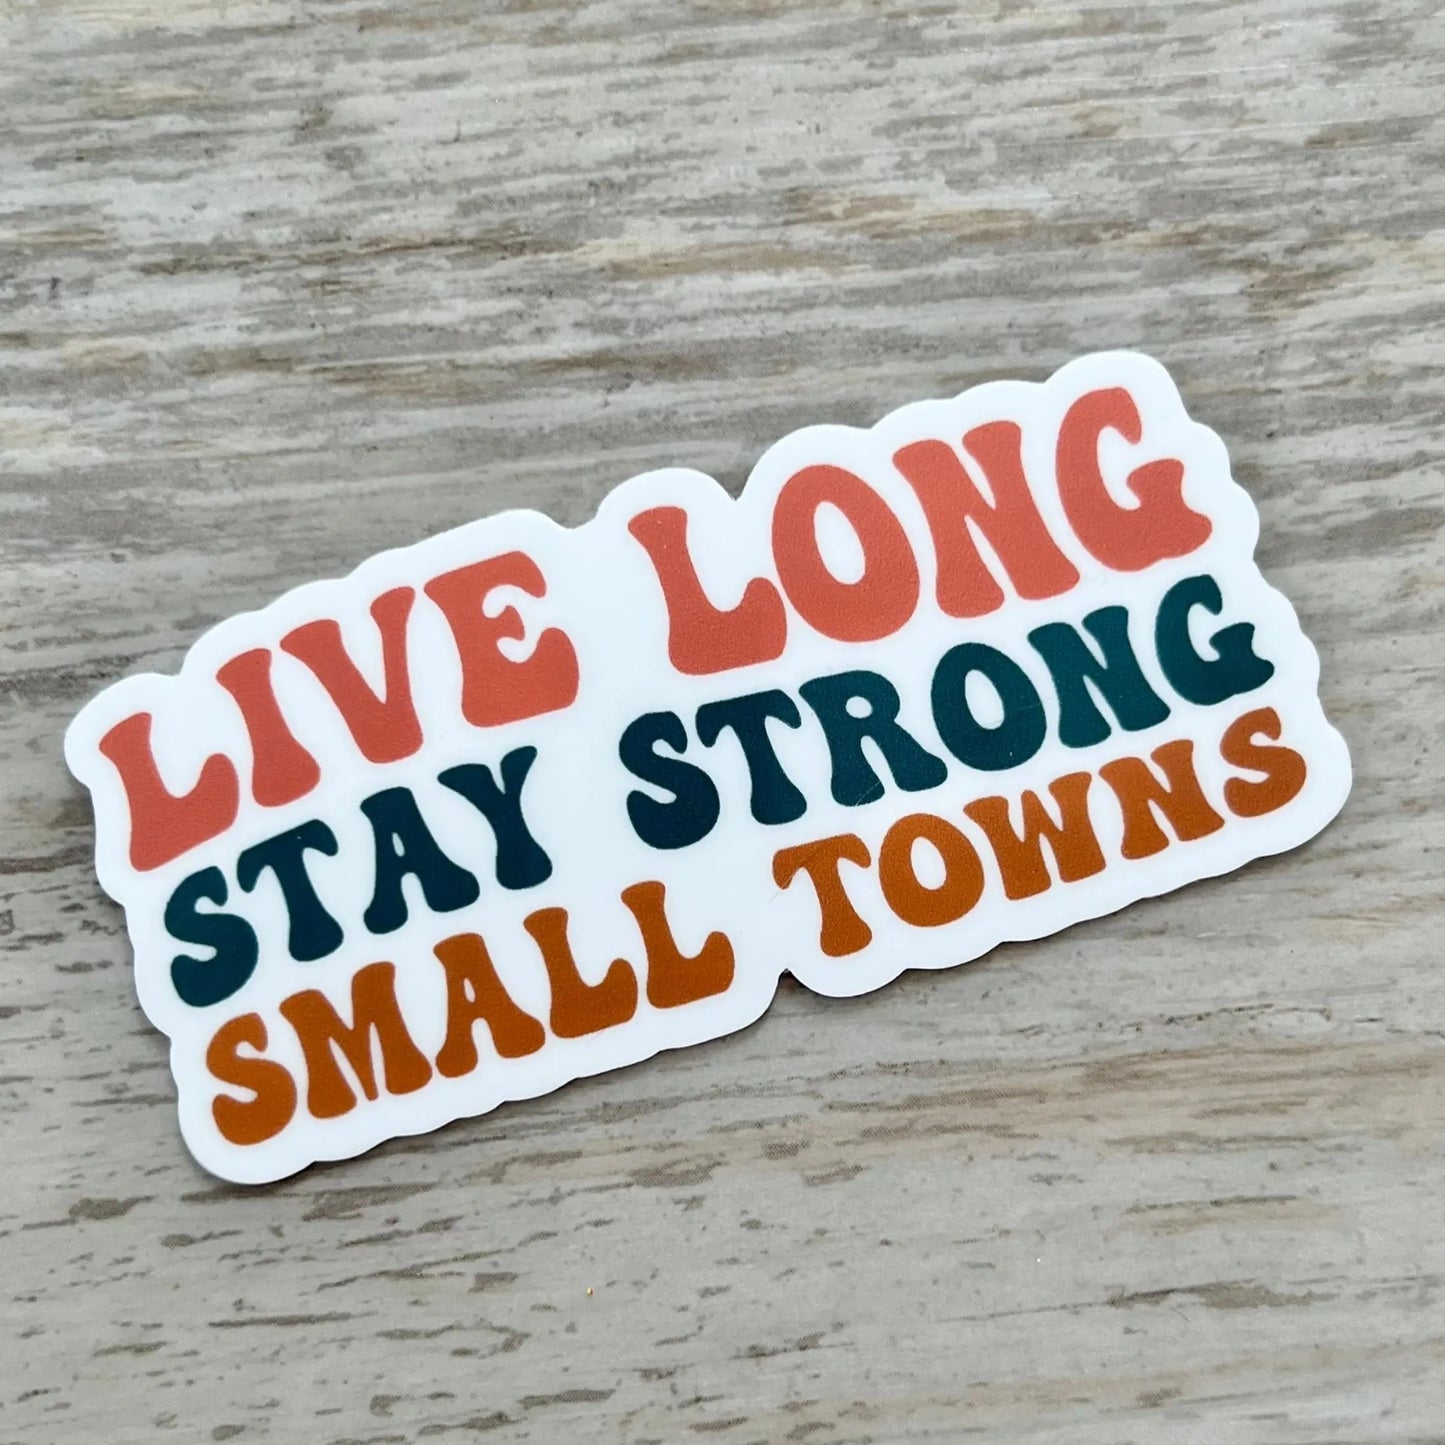 Live Long Stay Strong Small Towns Sticker